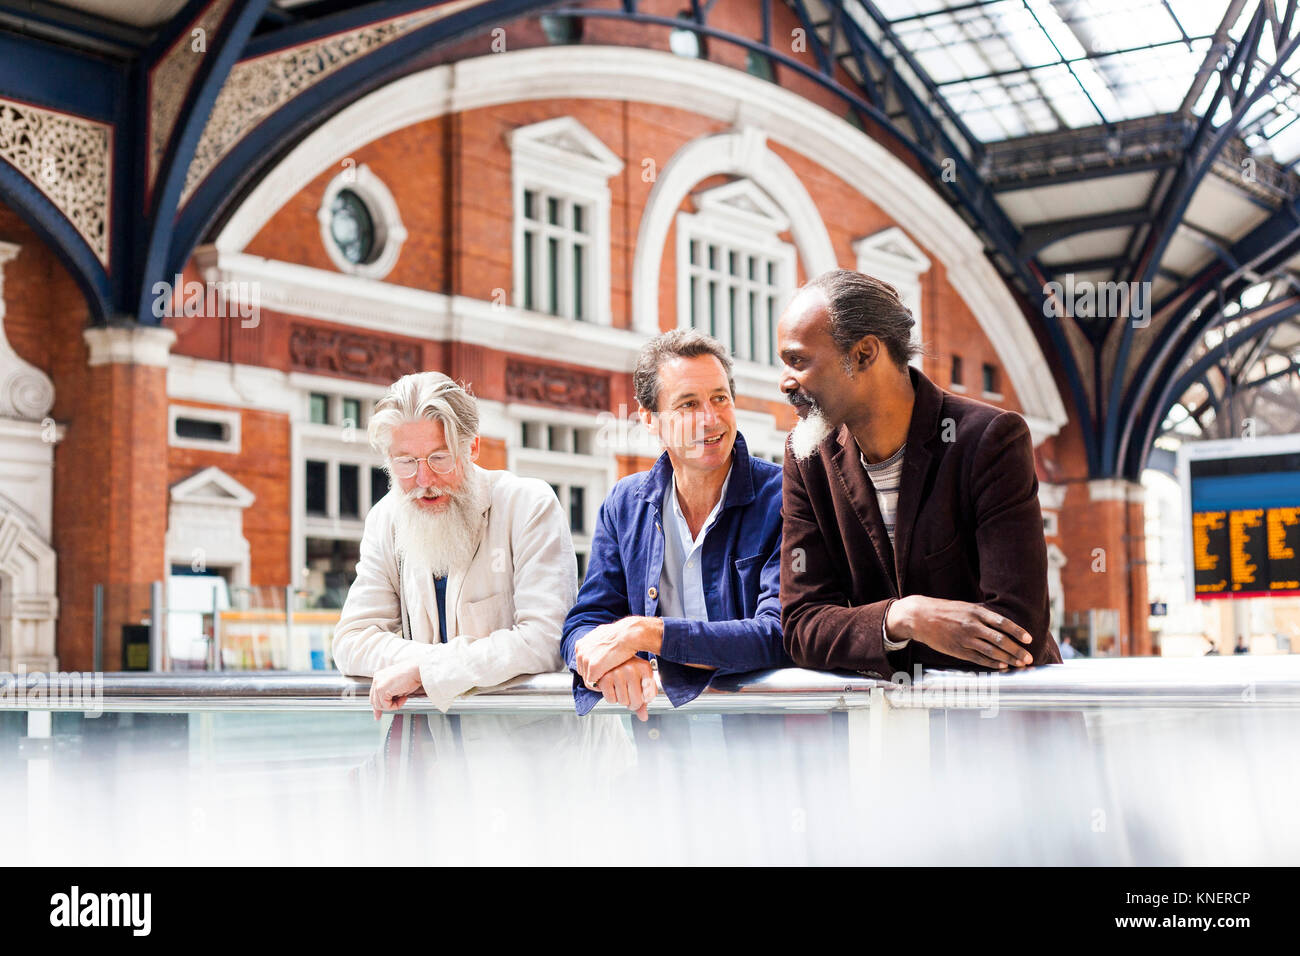 Three mature men at train station, standing together, talking Stock Photo